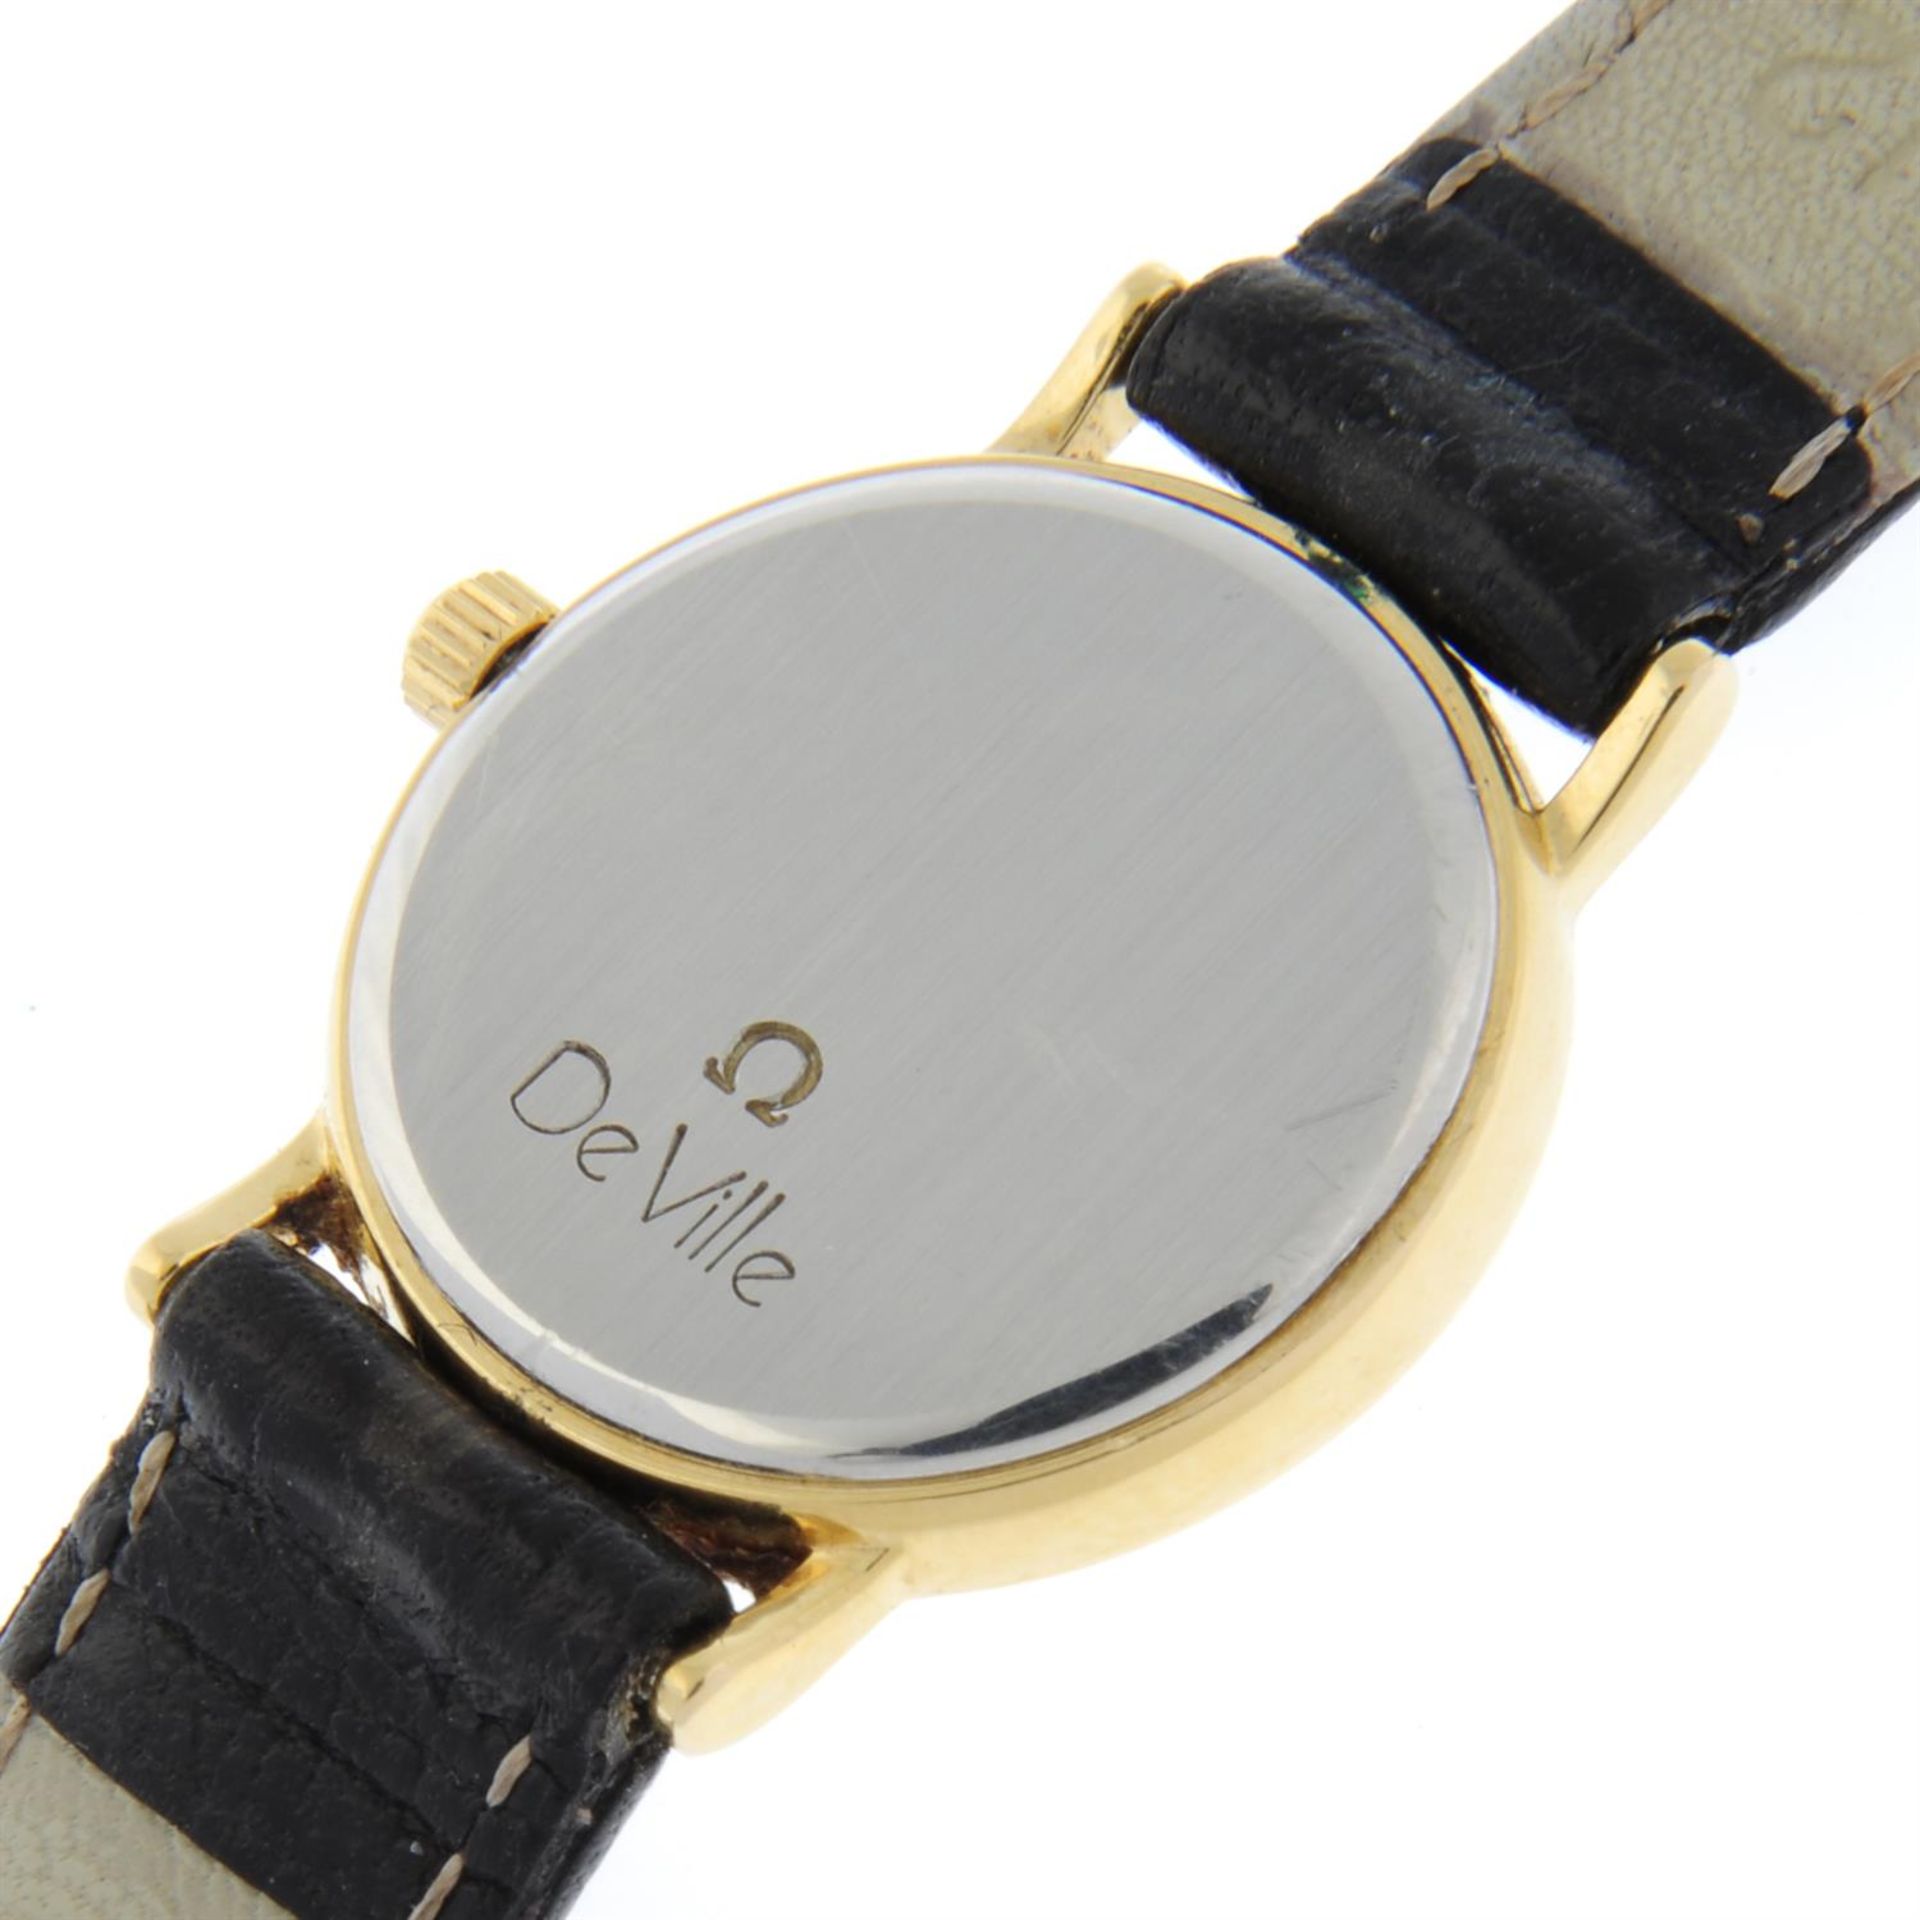 OMEGA - a gold plated De Ville wrist watch, 22mm. - Image 4 of 4